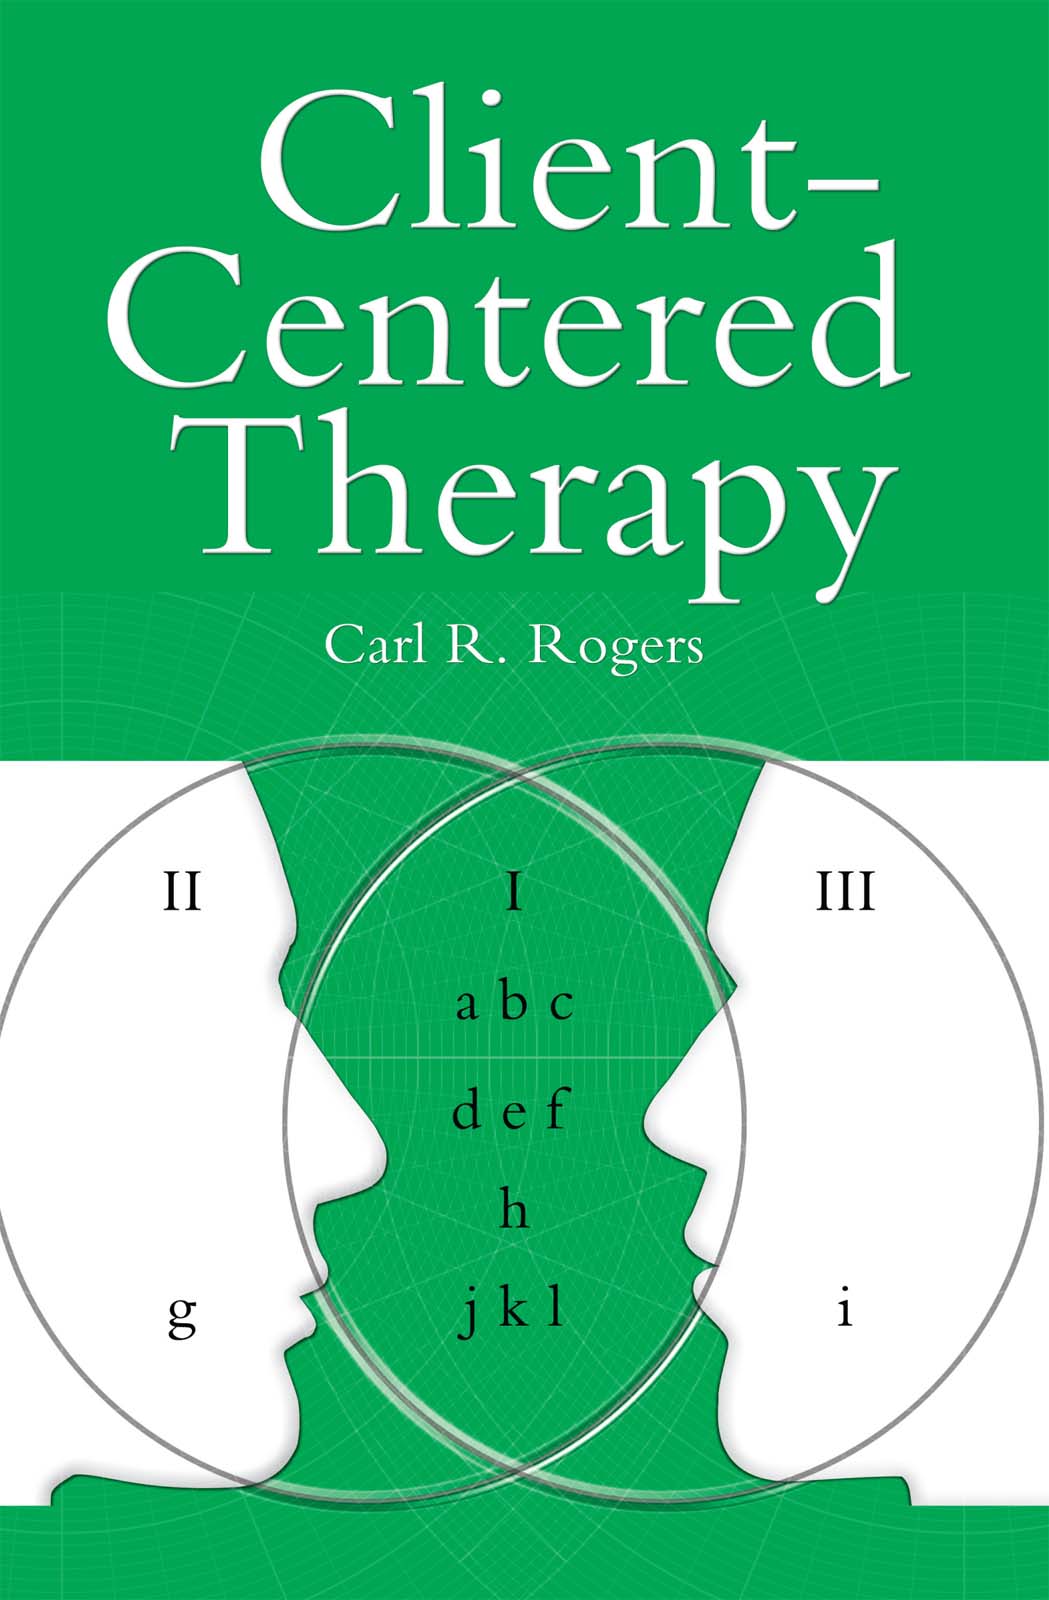 Client Centered Therapy - Carl Rogers